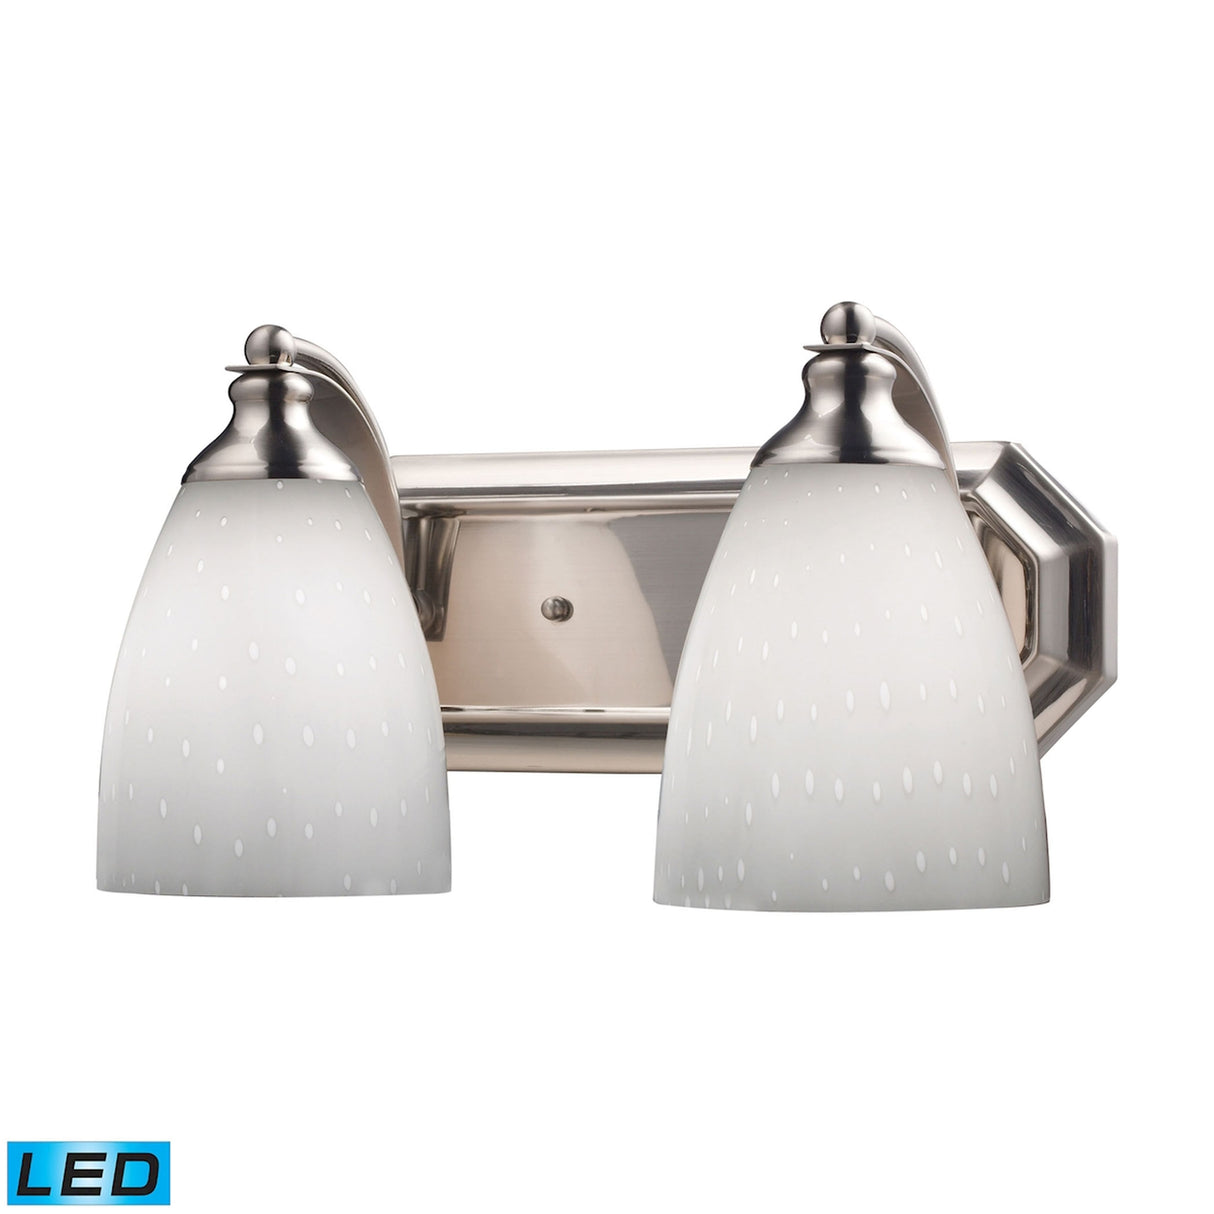 Elk 570-2N-WH-LED Mix-N-Match Vanity 2-Light Wall Lamp in Satin Nickel with Simple White Glass - Includes LED Bulbs